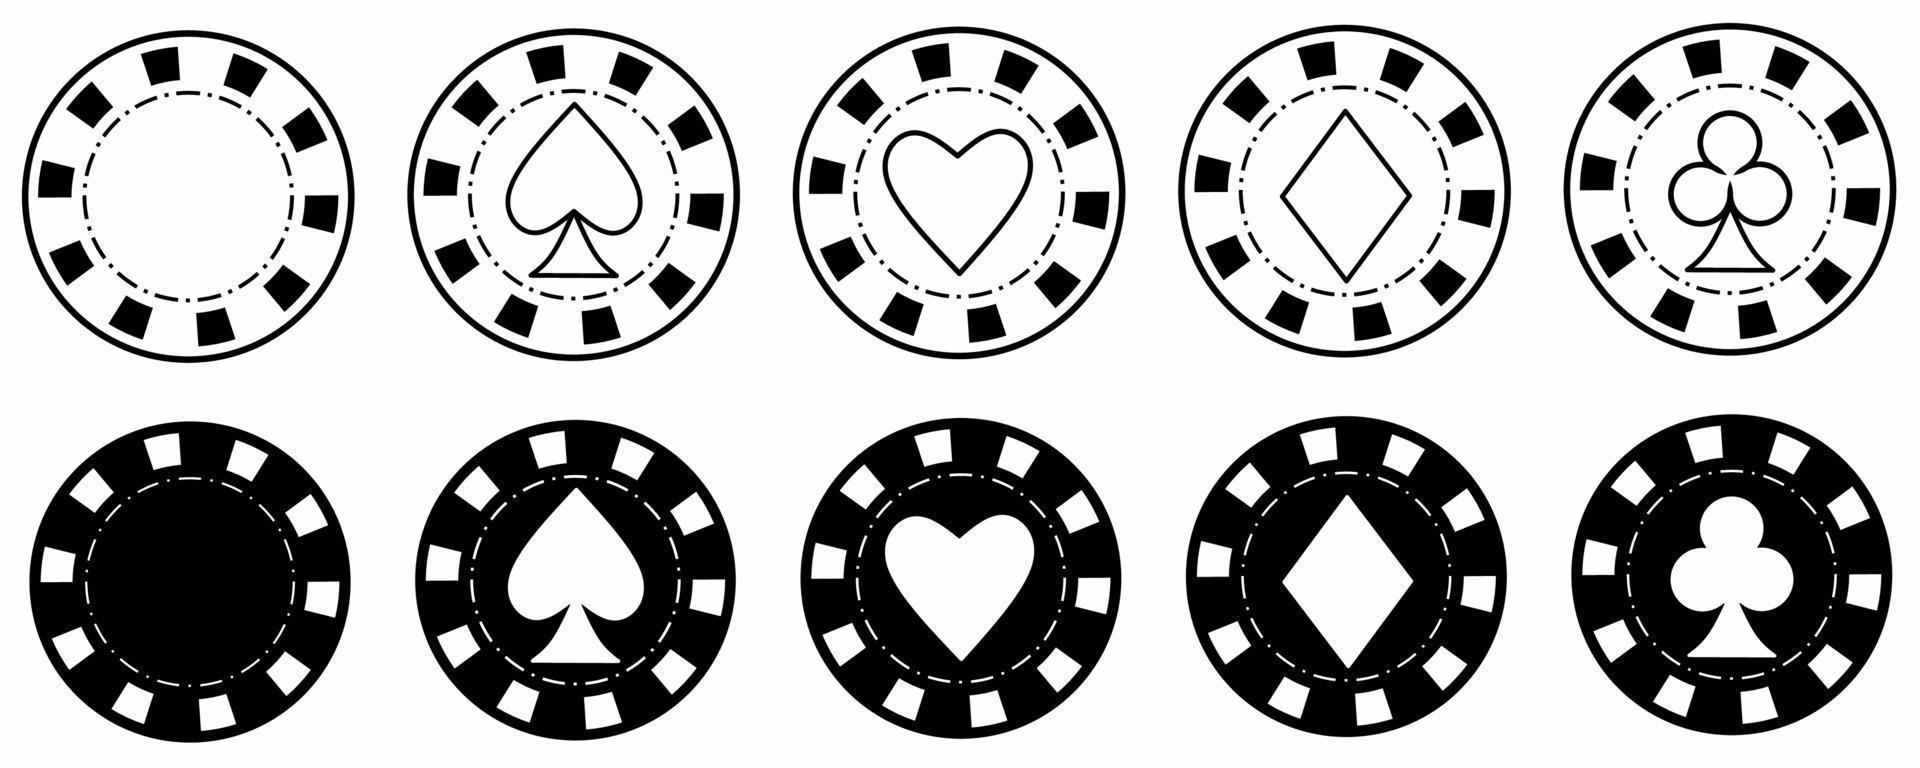 outline silhouette poker chips icon set isolated on white background vector